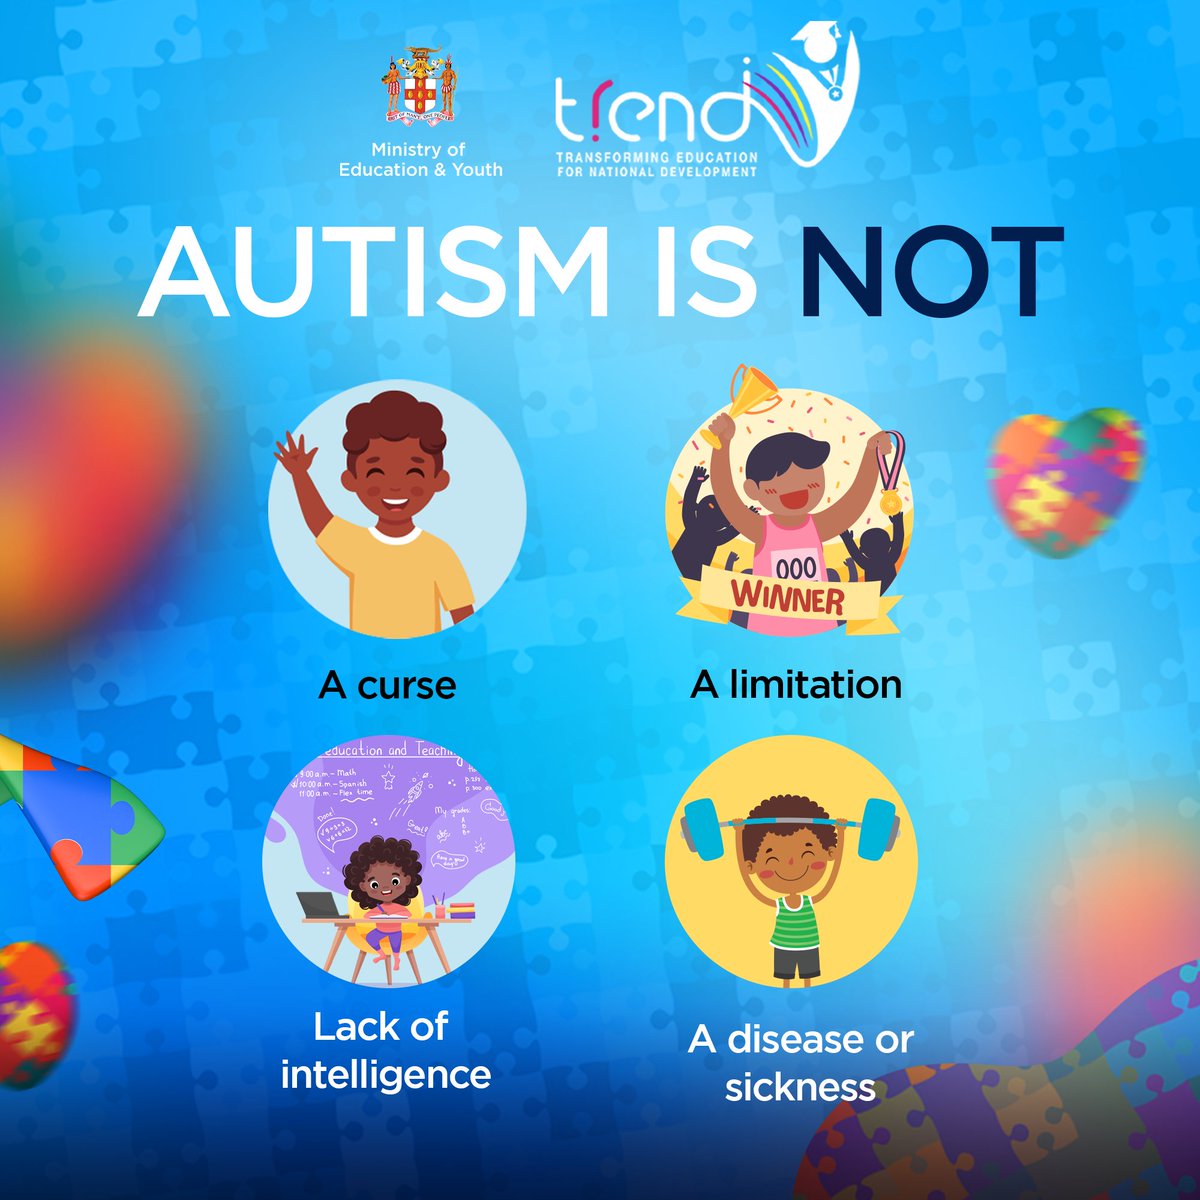 Join us in celebrating World Autism Day! Together, let's foster understanding, acceptance, and inclusion for individuals with autism. #TREND #MoEY #WorldAutismAwarenessDay